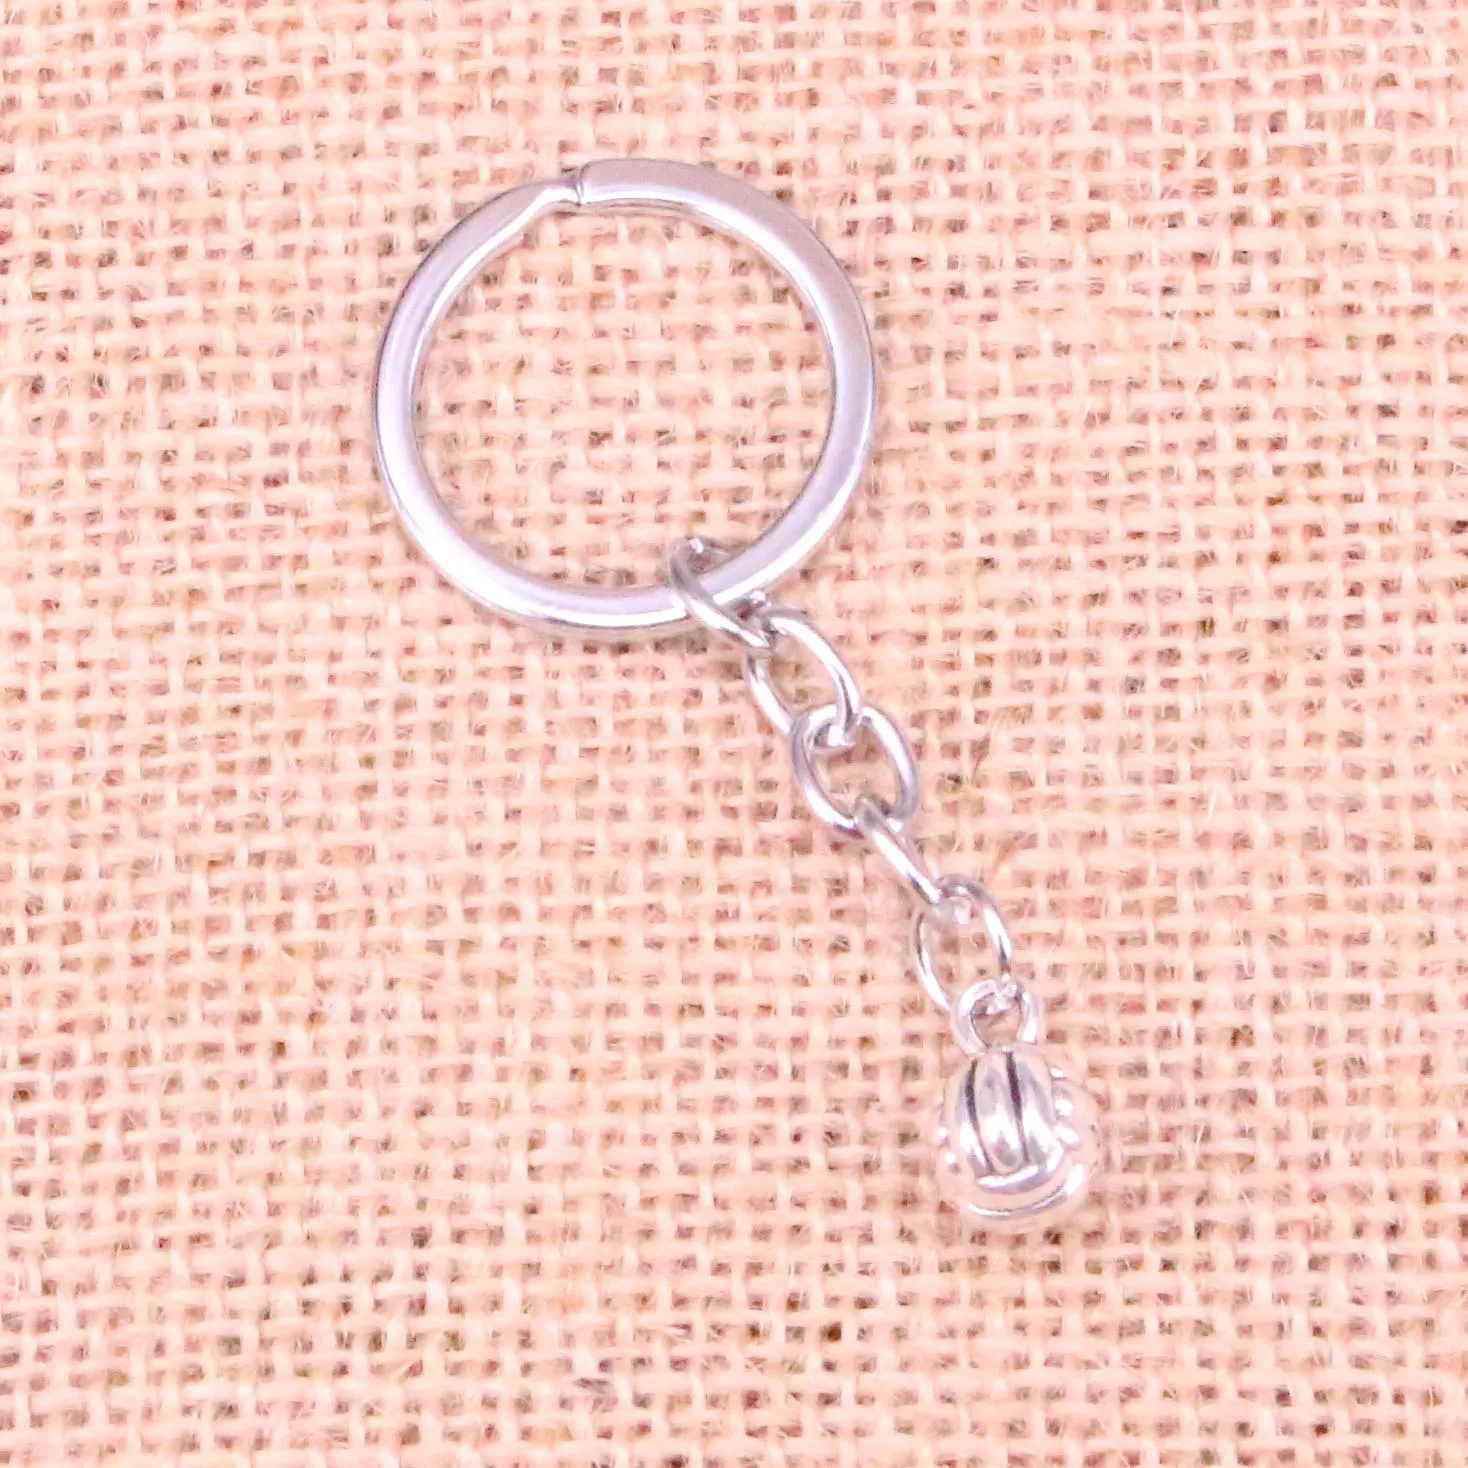 New Arrival 3d volleyball Charm Pendant Keychain Key Ring Chain Accessories Jewelry Making For Gifts | Украшения и аксессуары